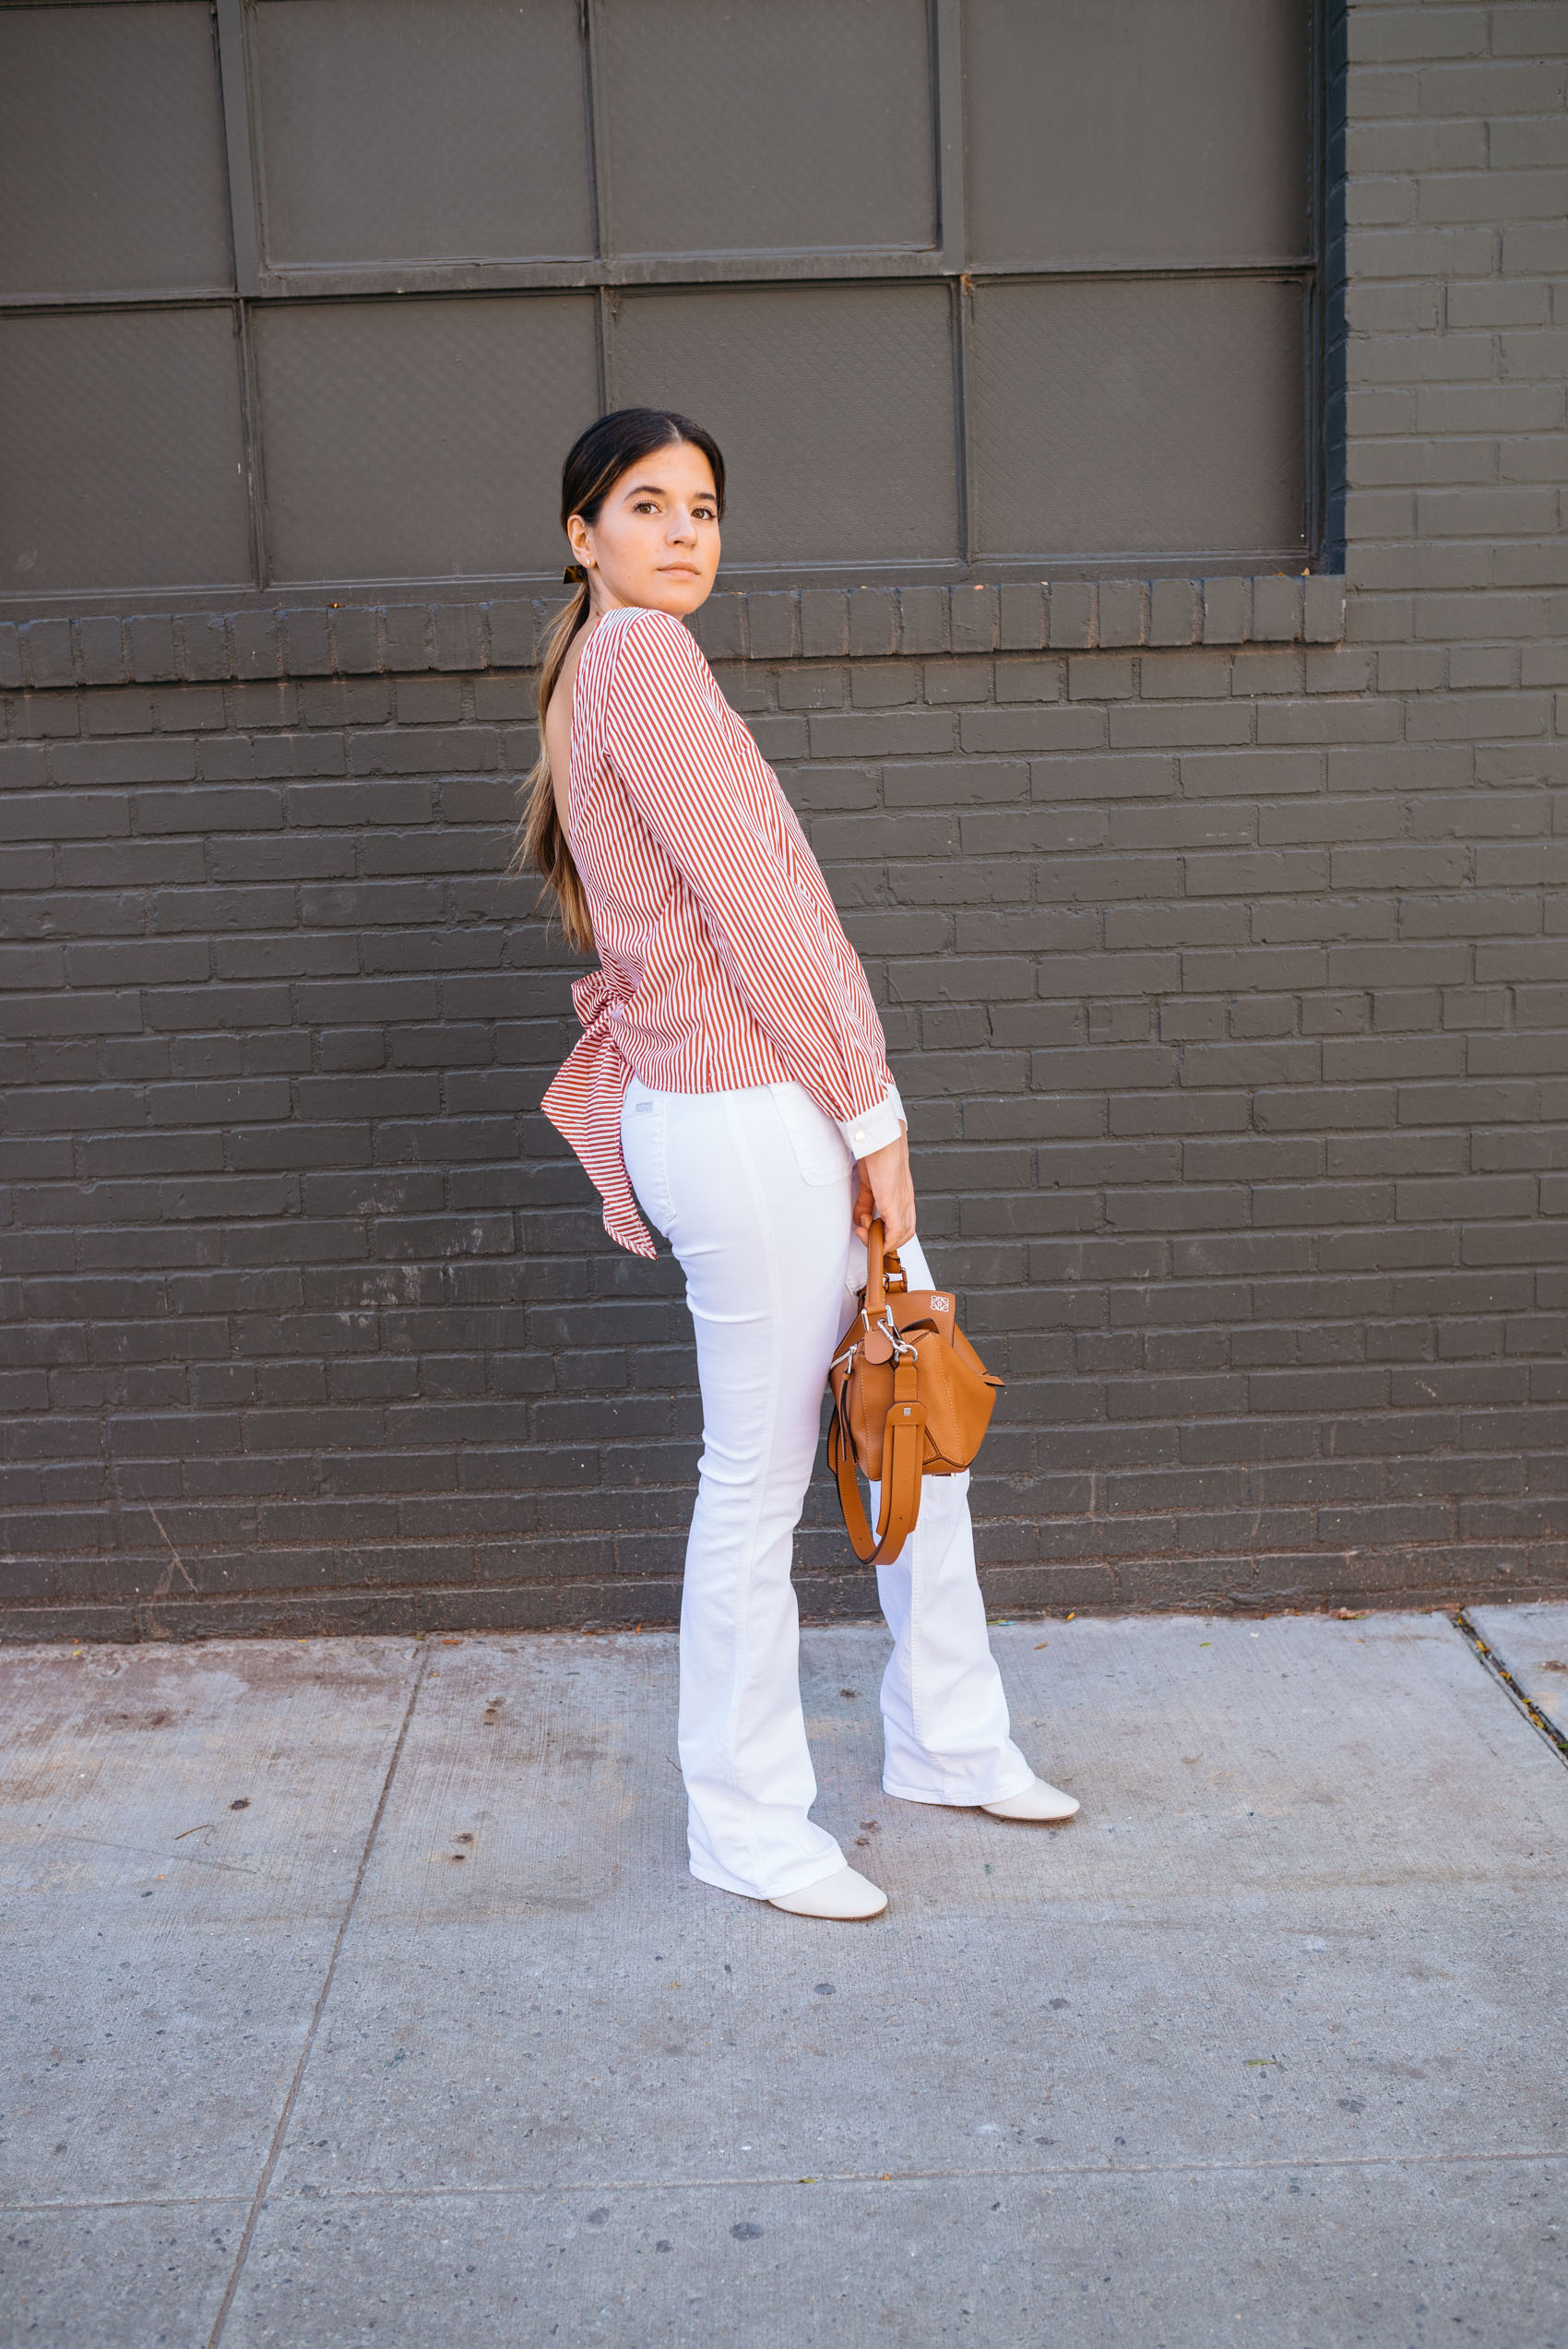 Blogger Maristella in NYFW wearing white flared jeans, ankle boots and a striped blouse